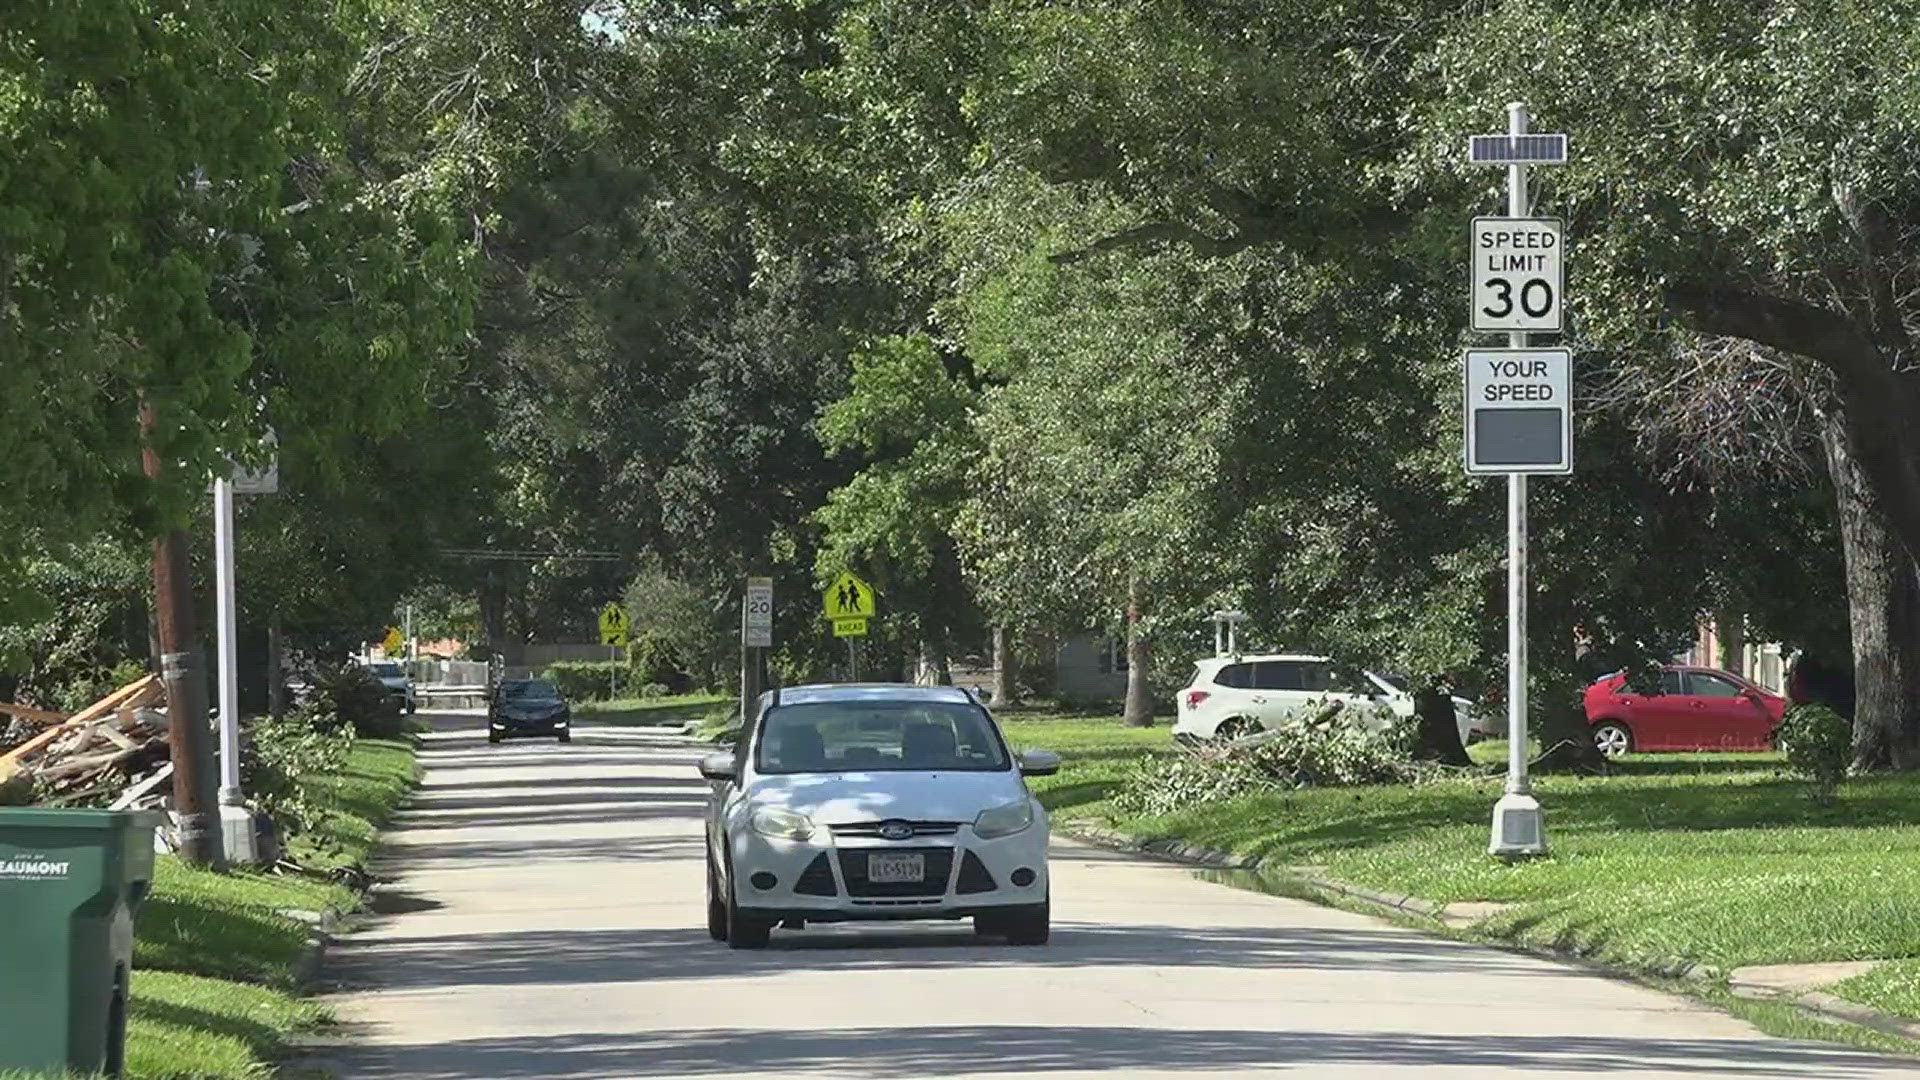 The council is considering adding speed radar signs near Sallie Curtis Elementary in an attempt to make the neighborhood safer.